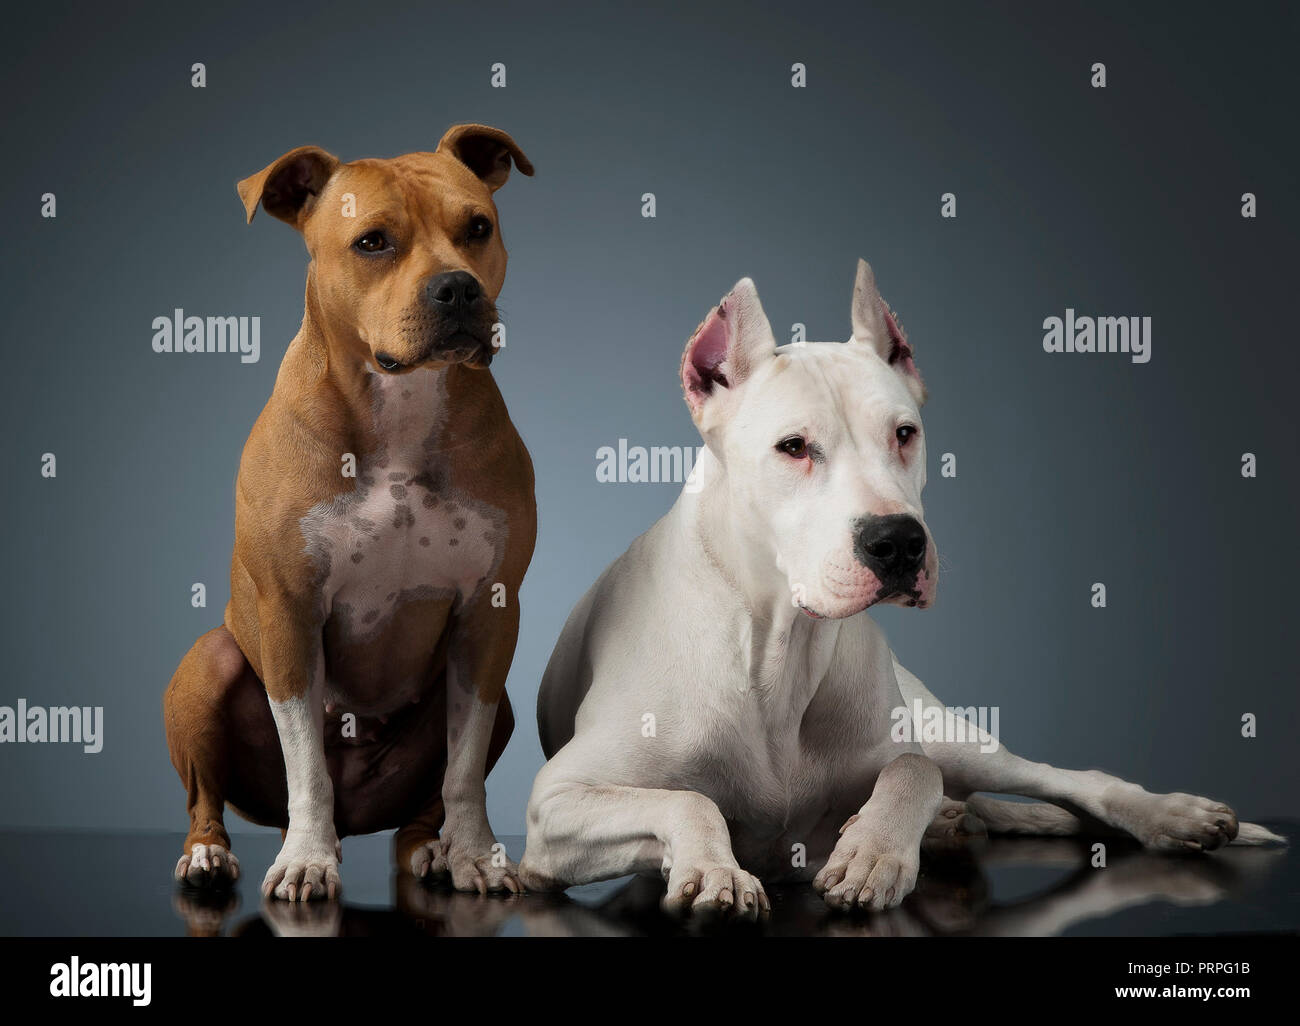 Argentin Dog and Staffordshire Terrier on the shiny floor Stock Photo